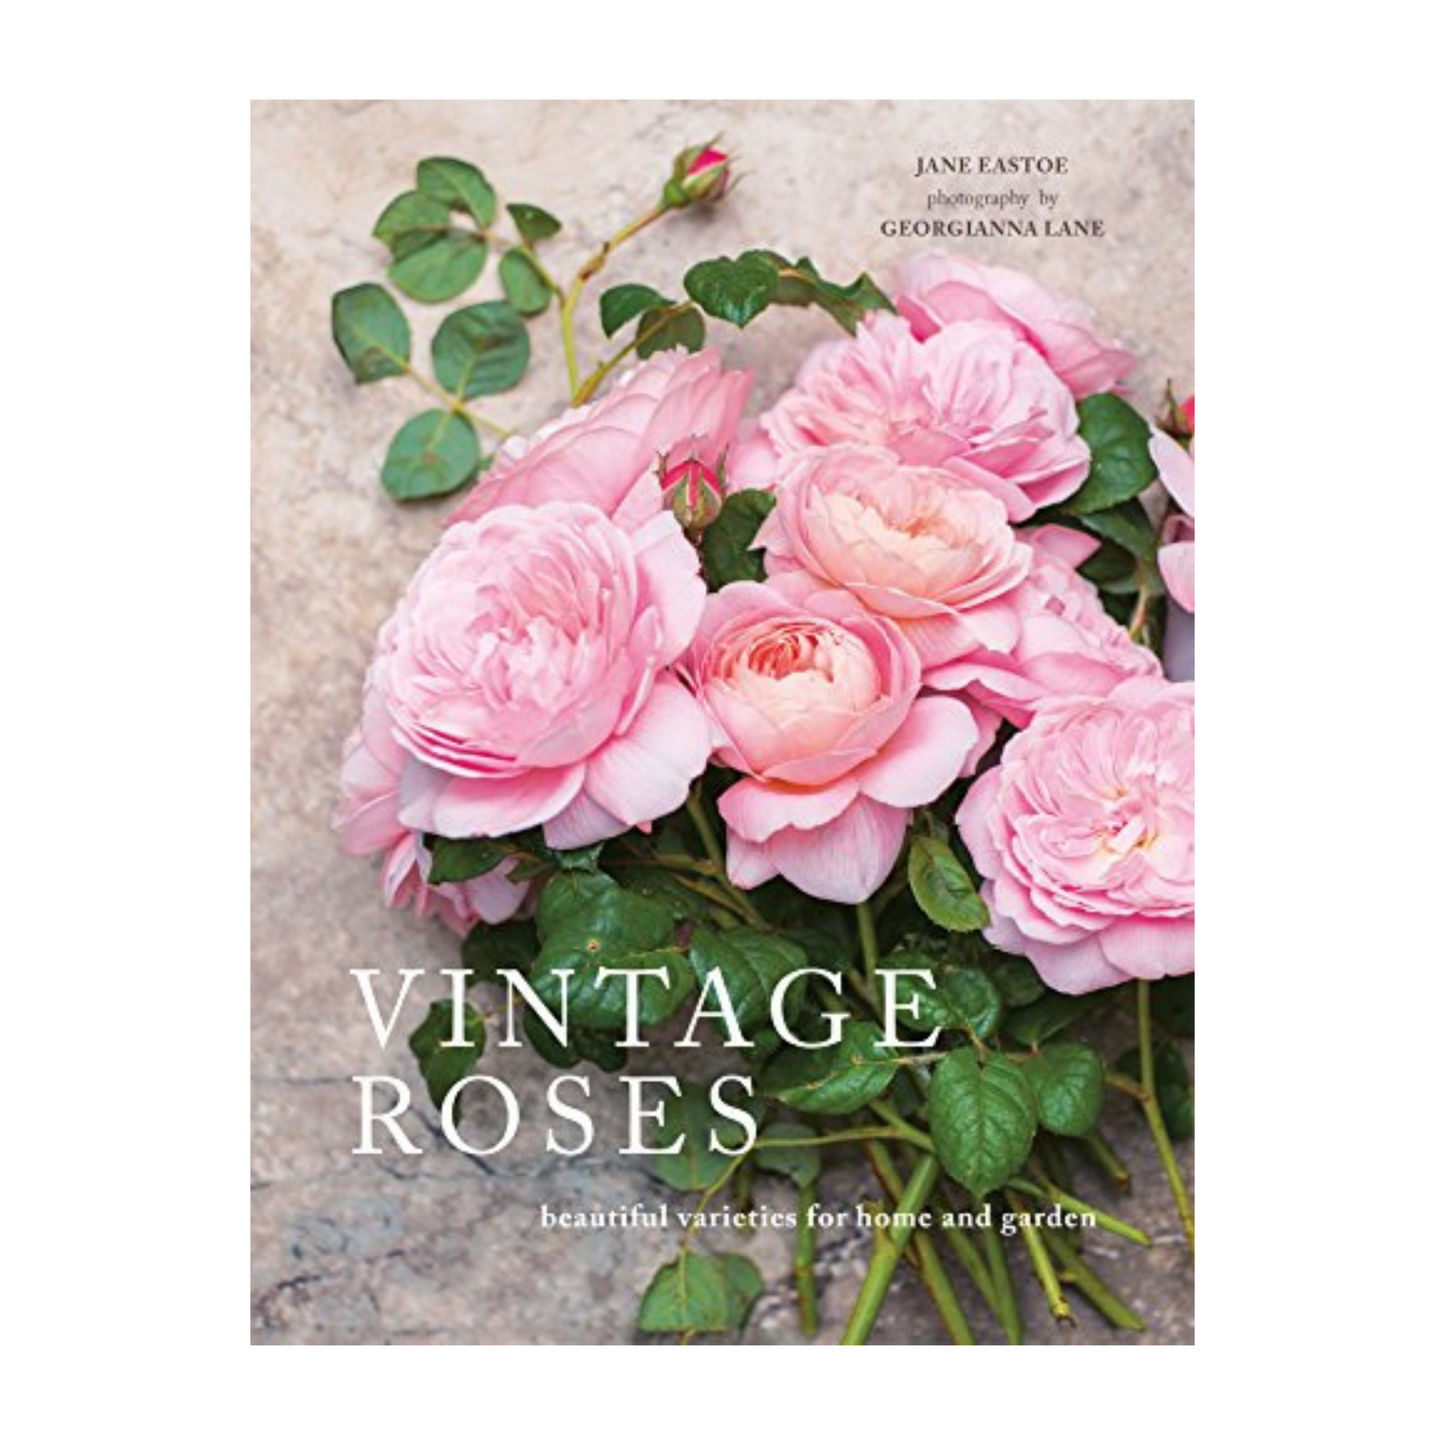 Book - Vintage Roses: Beautiful varieties for Home and Garden